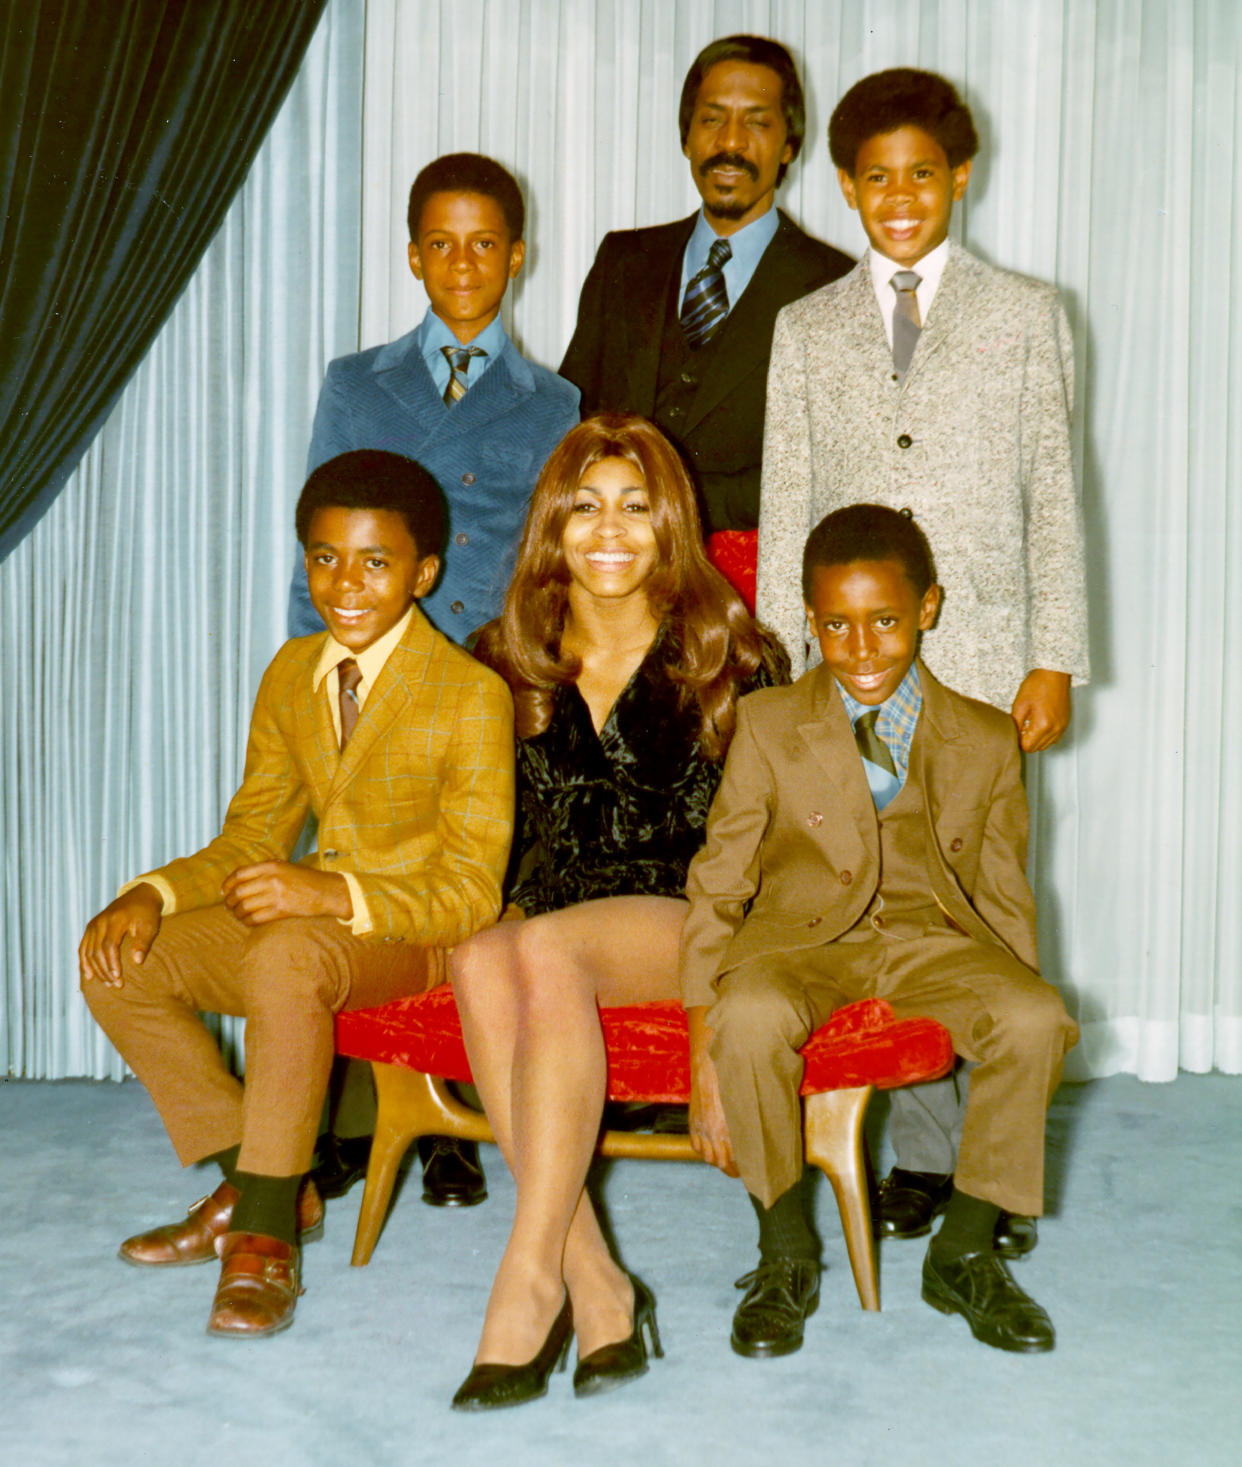 Ike & Tina Turner with their son and step-sons in circa 1972. Top row: Ike Turner, Jr., Ike Turner, and Craig Hill. Bottom row: Michael Turner, Tina Turner, and Ronnie Turner. (Getty Images)